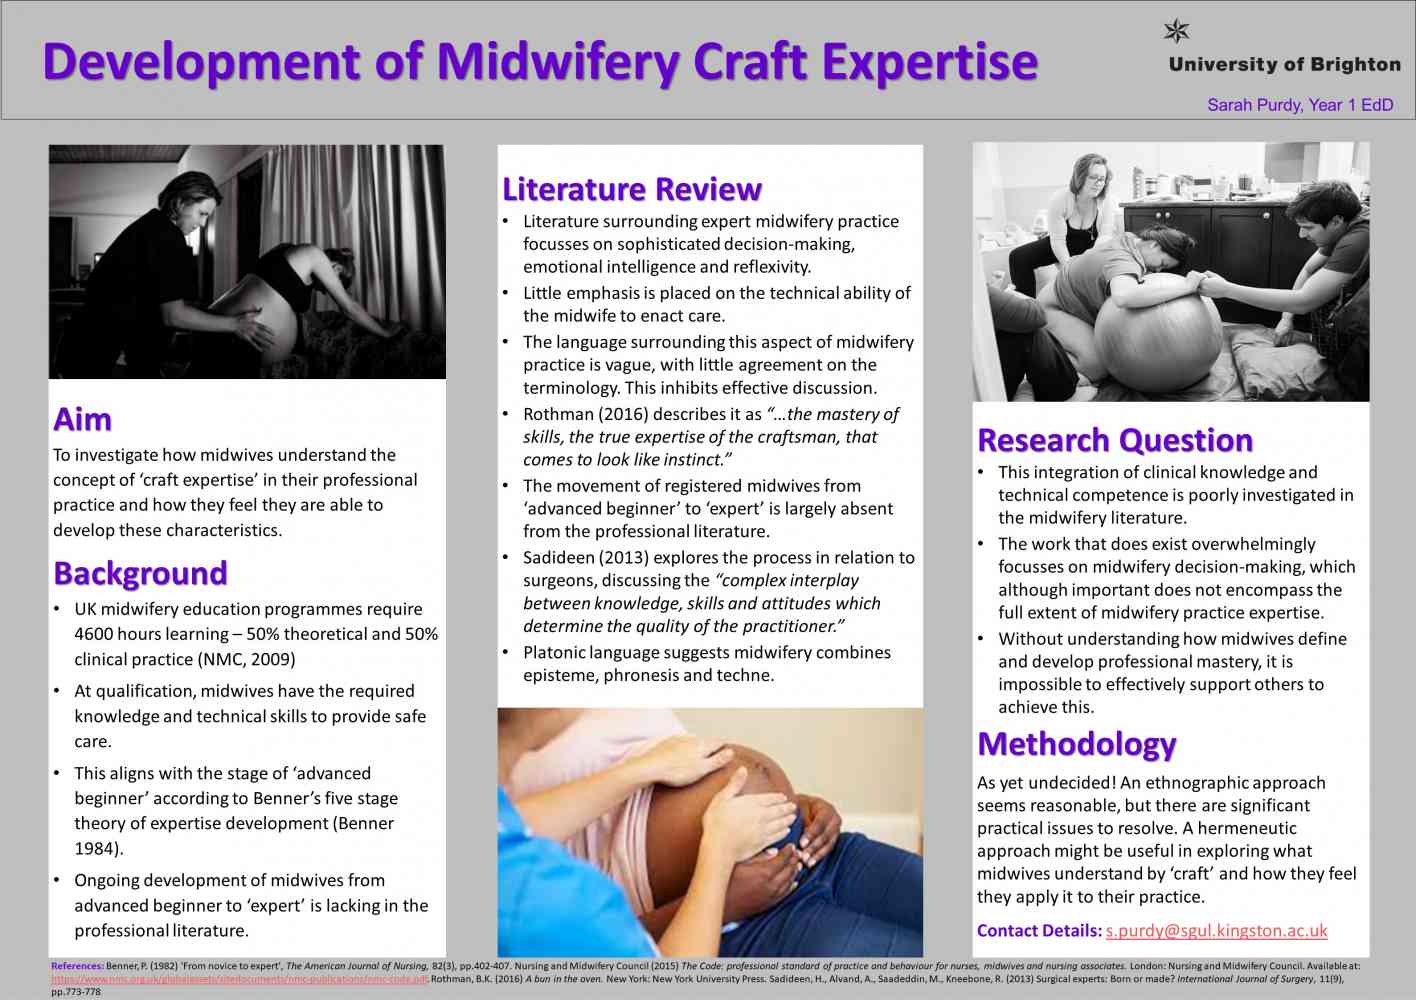 Poster presented at University of Brighton Postgraduate Education Conference 2019 - Development of Midwifery Craft Expertise